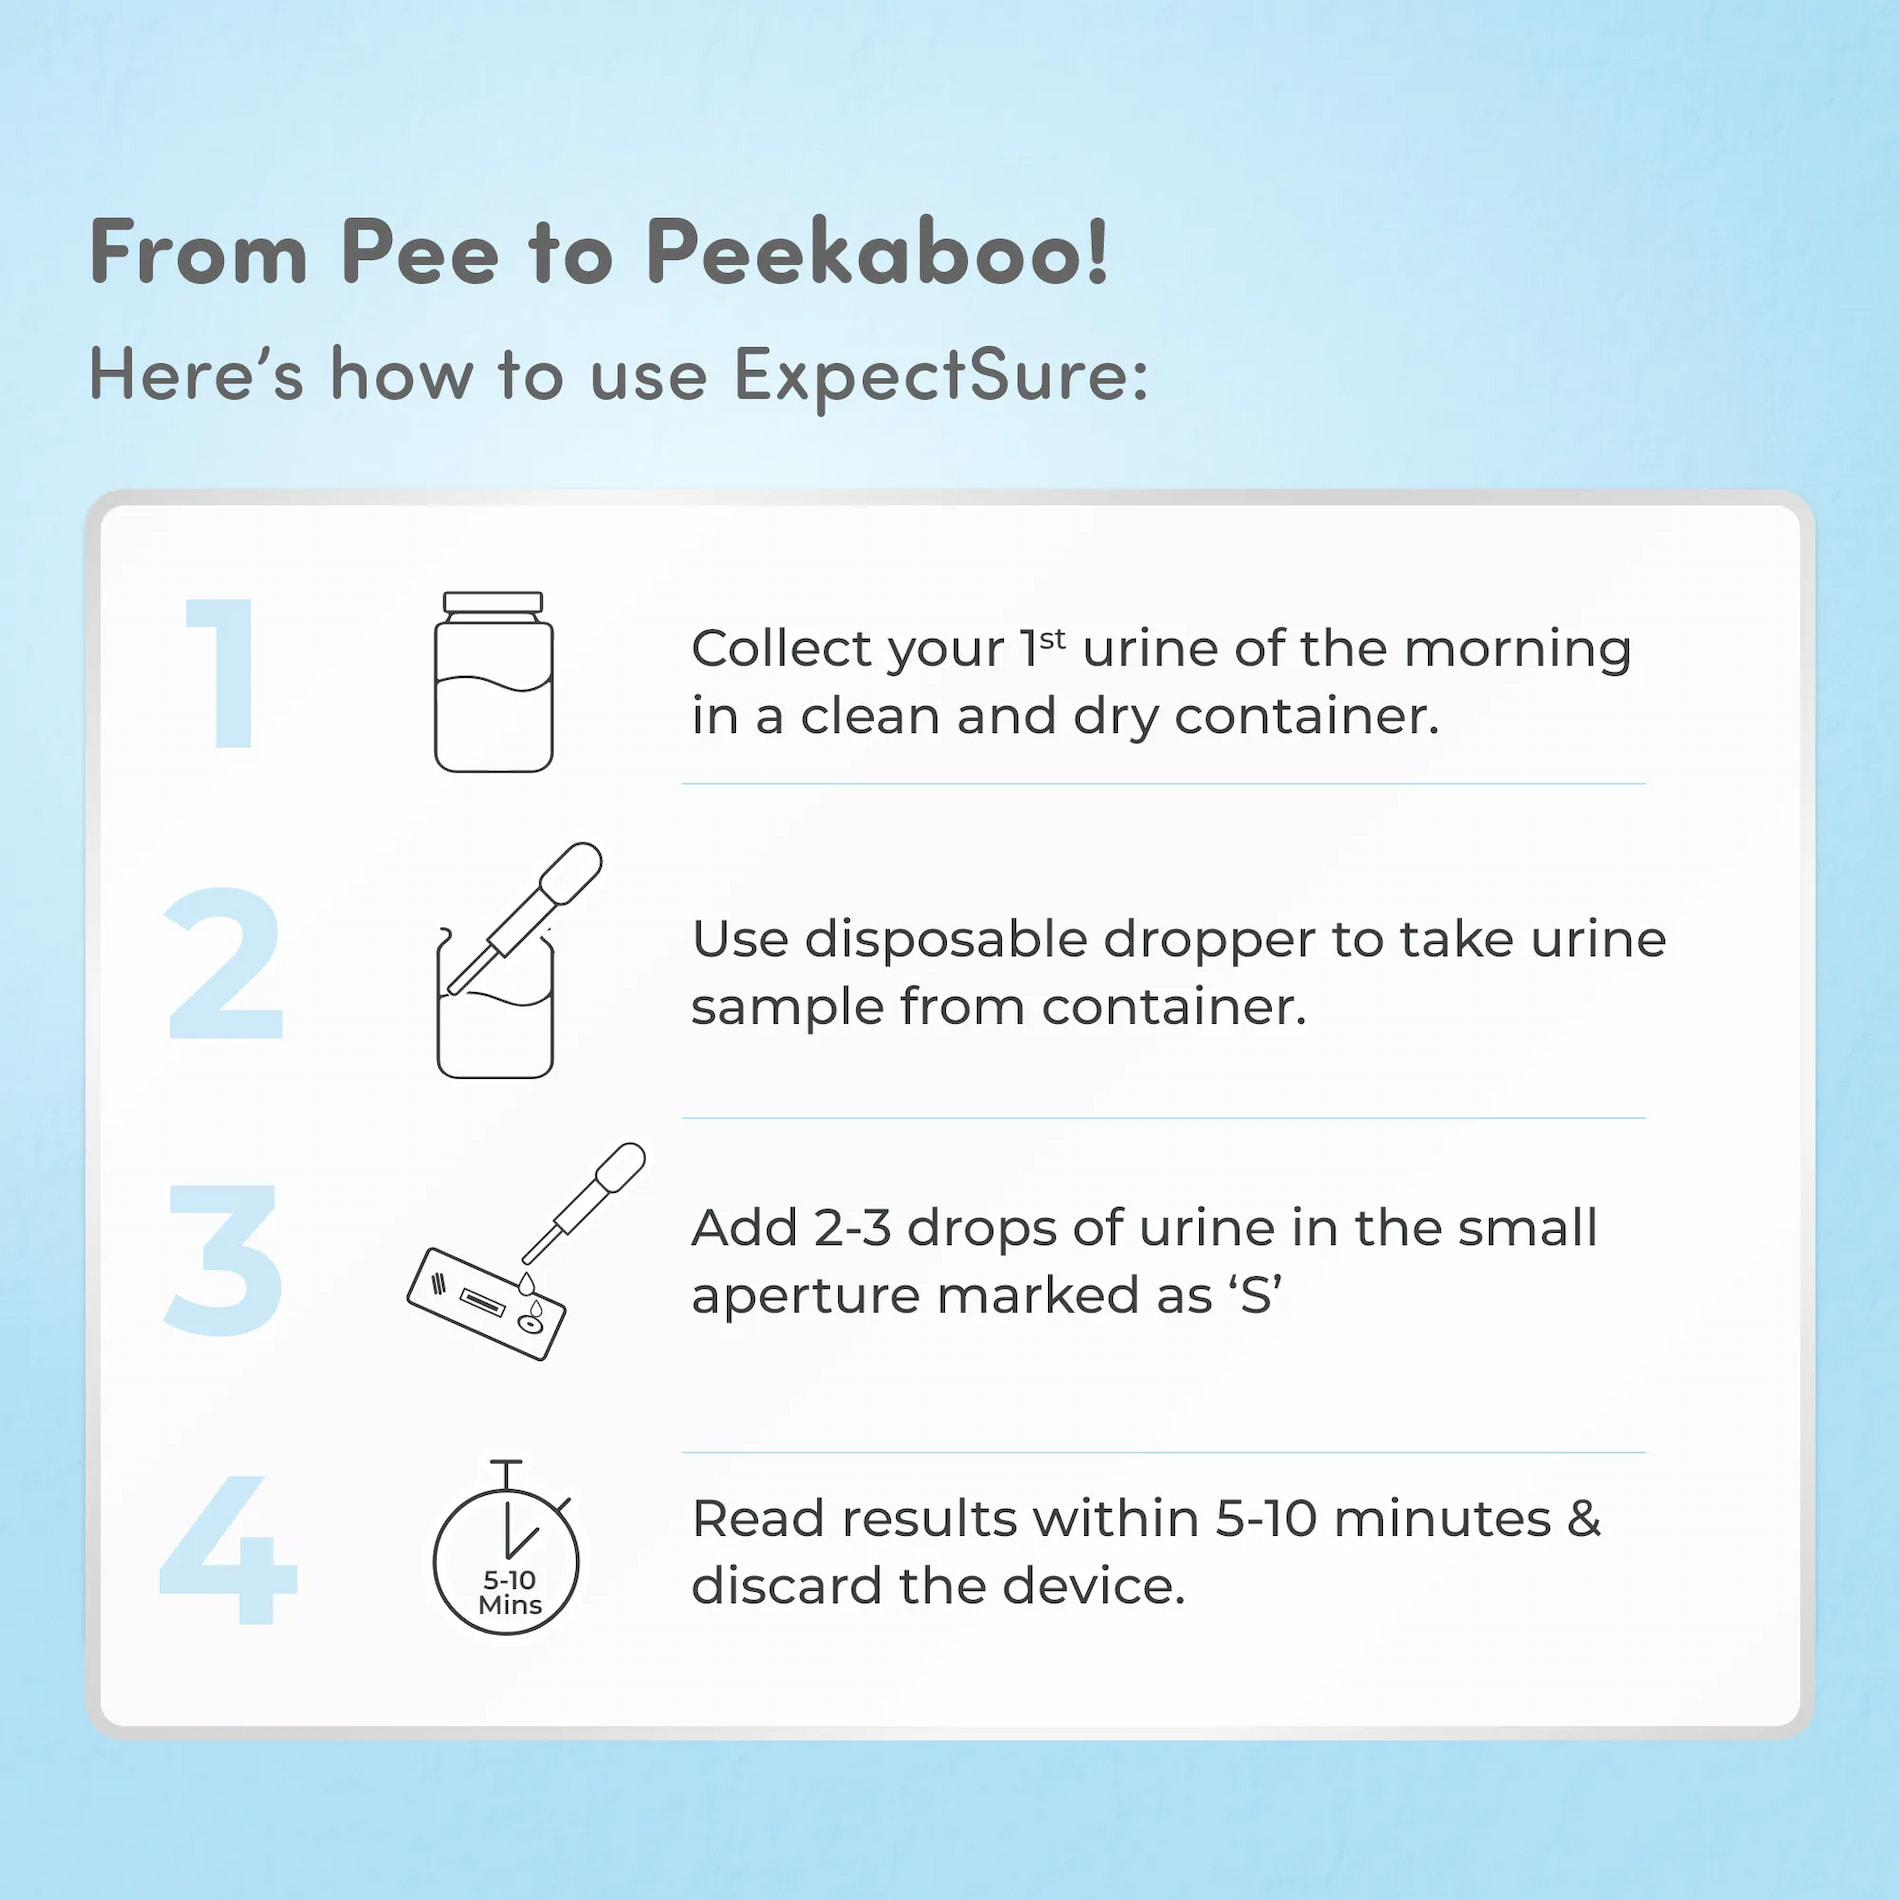 ExpectSure- Pregnancy Test Kit | Quick Results Within Minutes | Highly Accurate | Easy to Use | Helps Maintain Privacy - Pack of 3